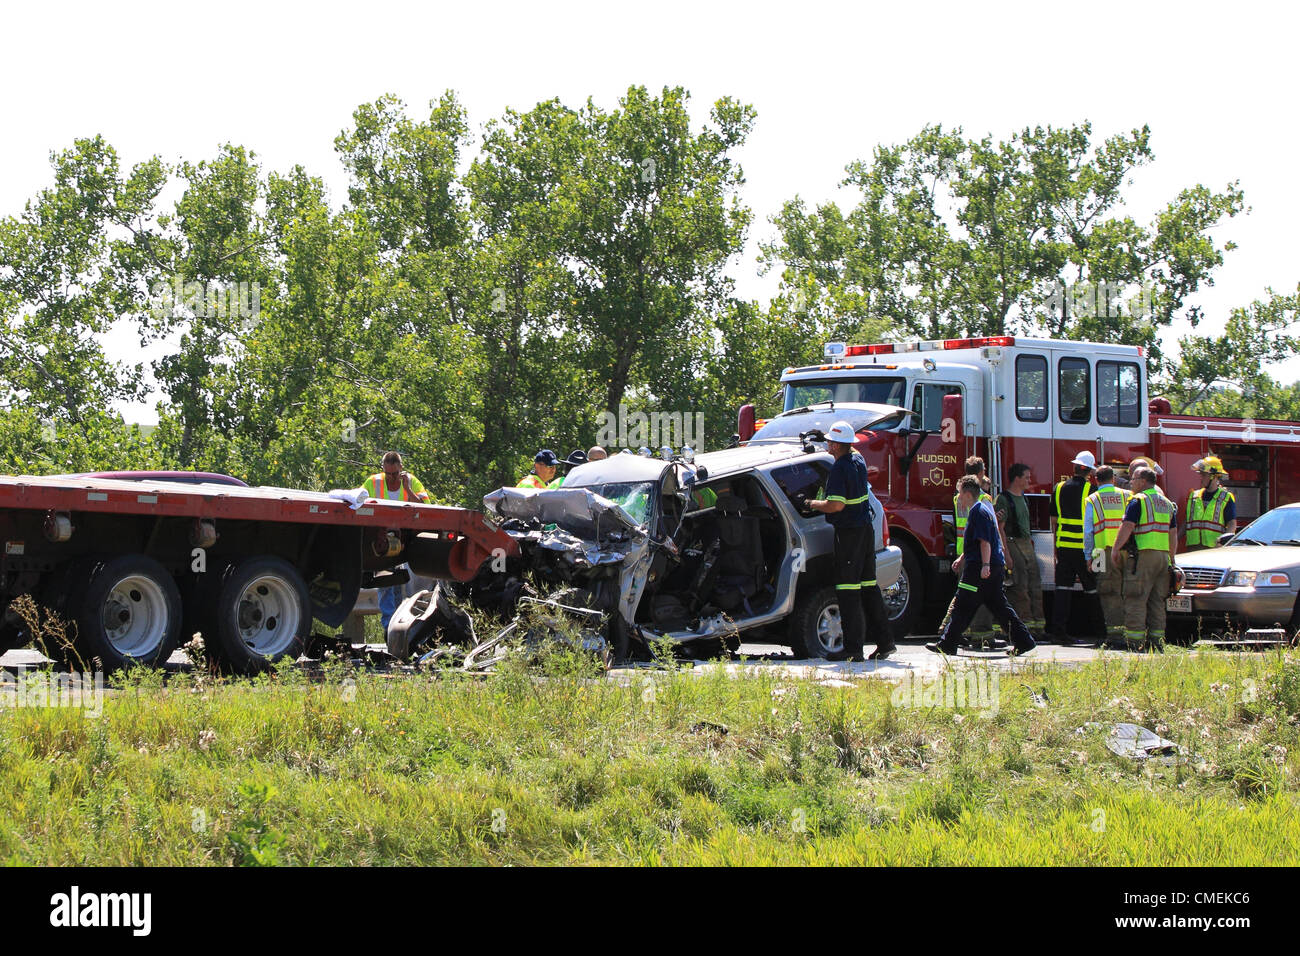 Monday, 30 July, 2012 -- Emergency workers clear the scene of a fatal accident near Hudson, Wisconsin, USA. The accident, which occurred when a Sport Utility Vehicle crashed into the rear of a flatbed semi-trailer on I-94 near mile marker 6, caused at least one fatality. Stock Photo